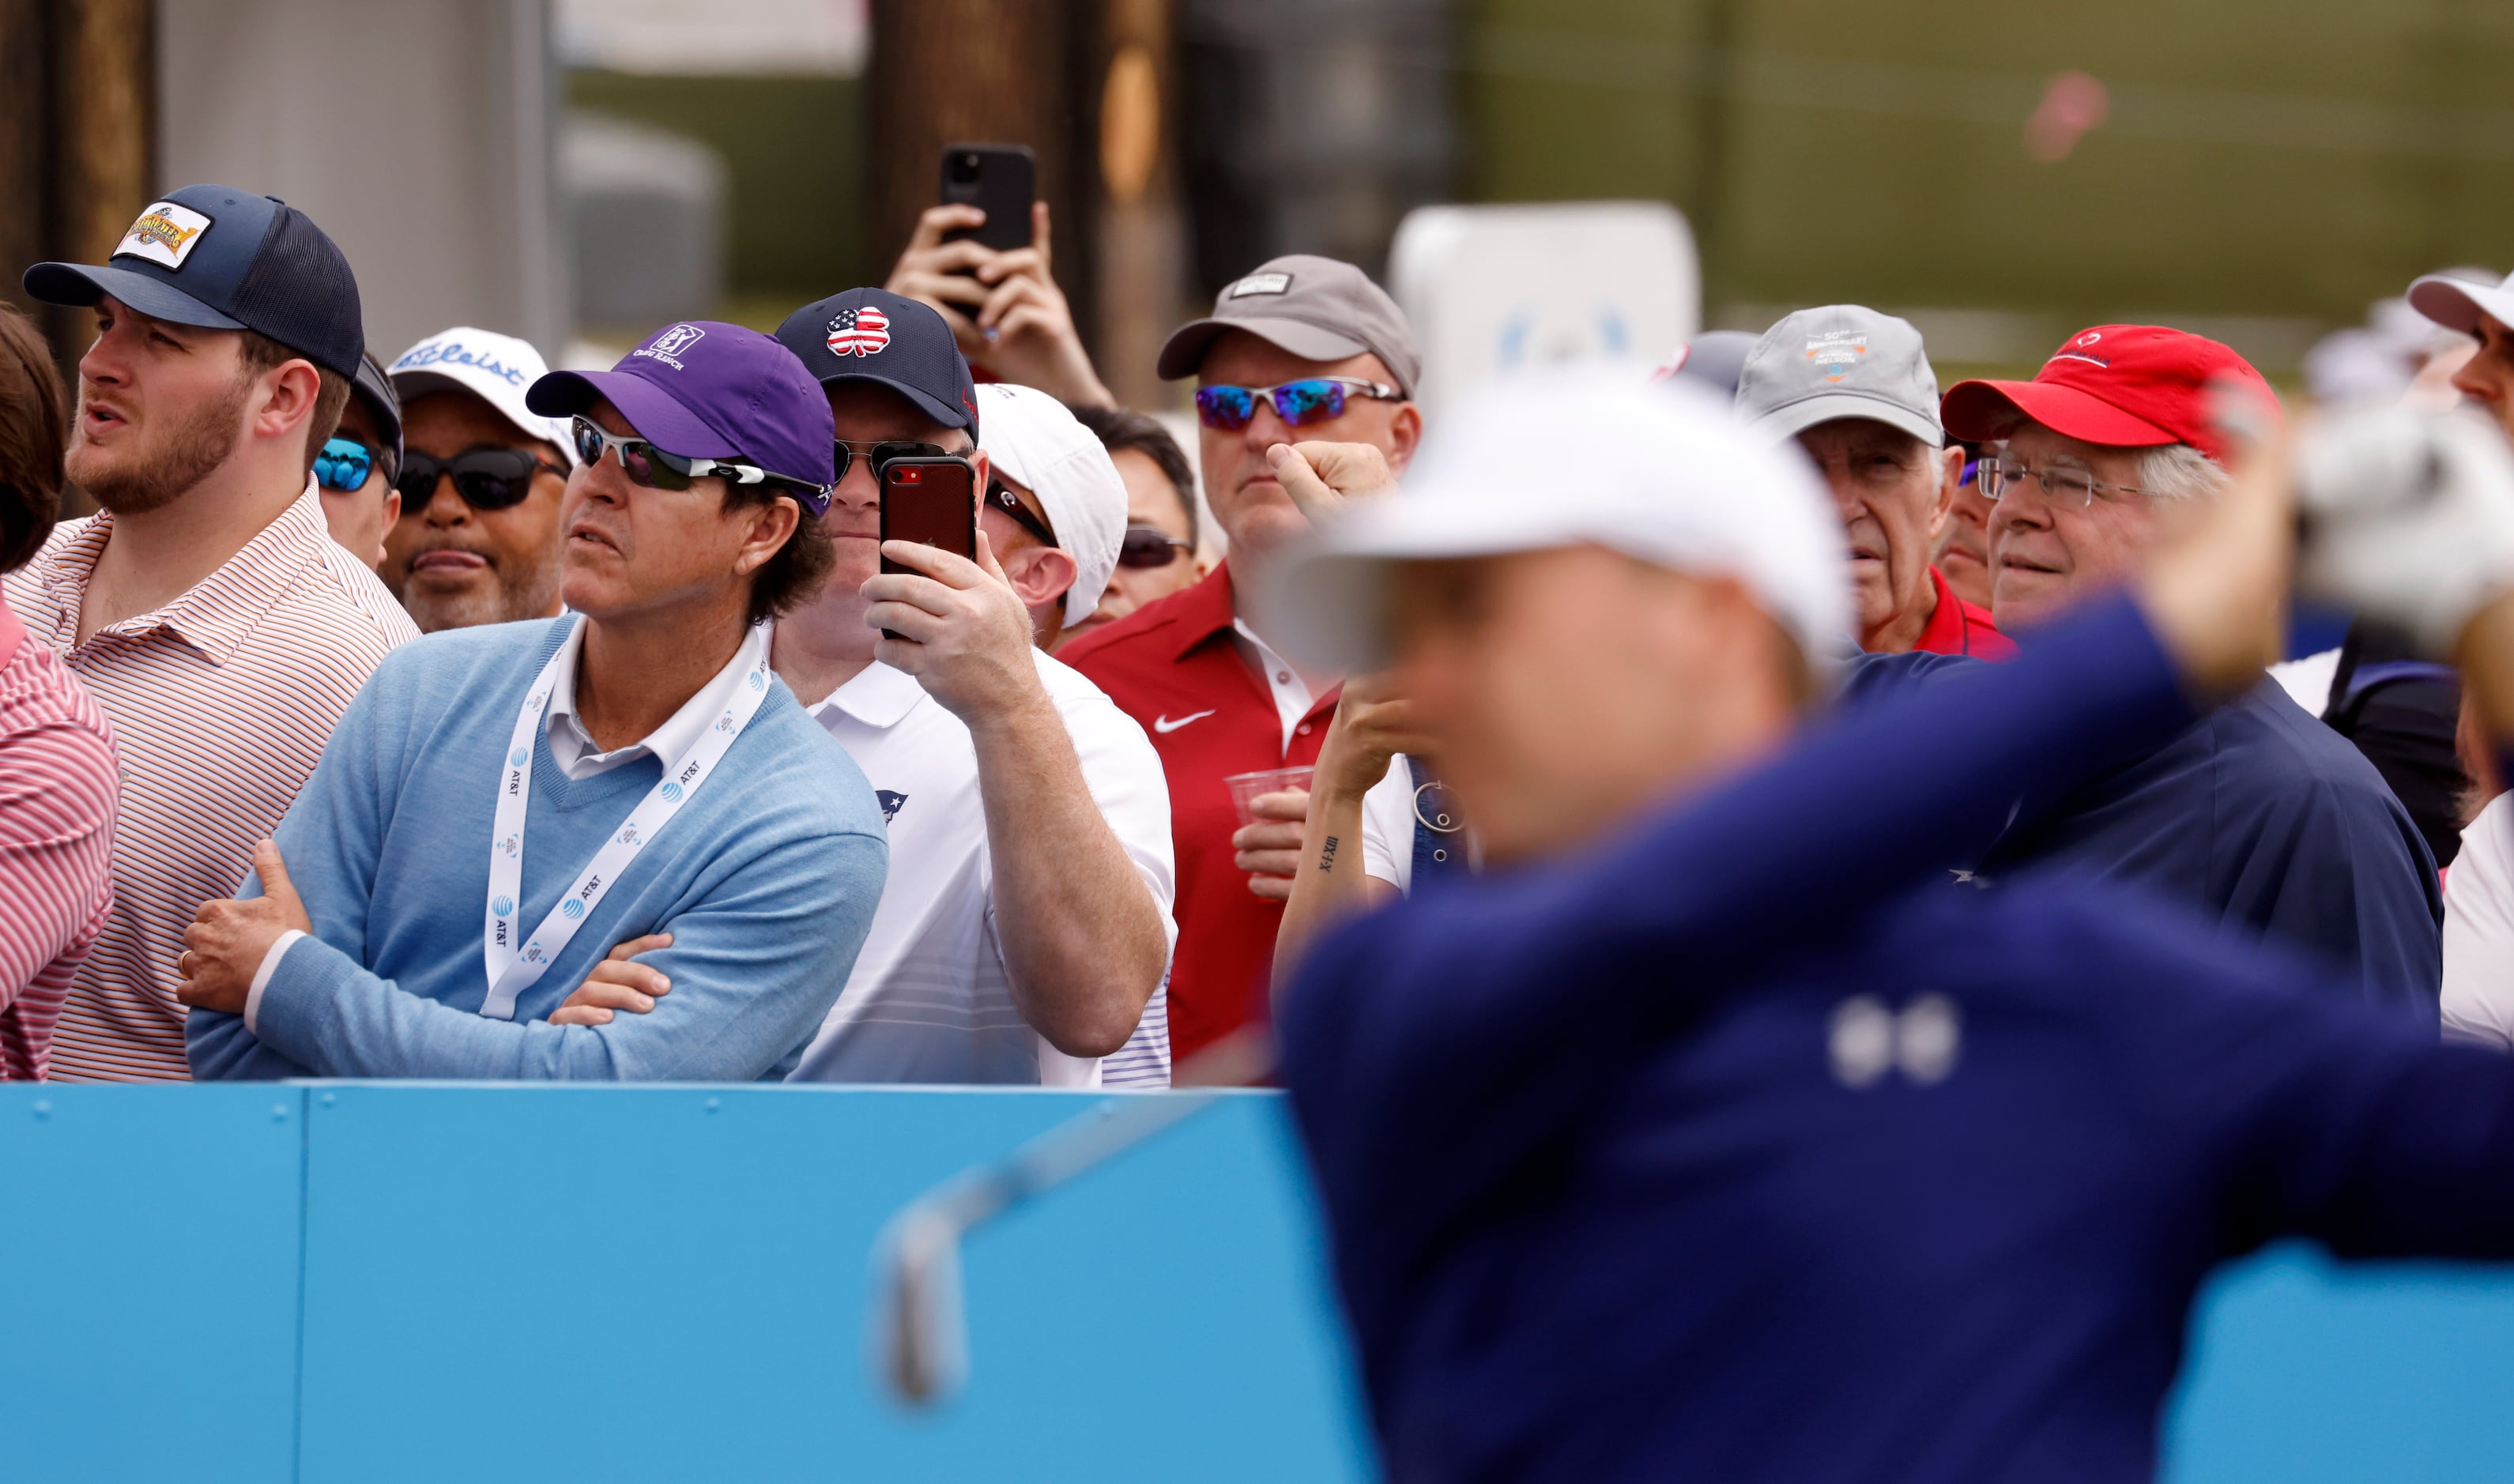 Some fans watch the path of Jordan Spieth's ball as others Fans record Spieth on the 7th tee...